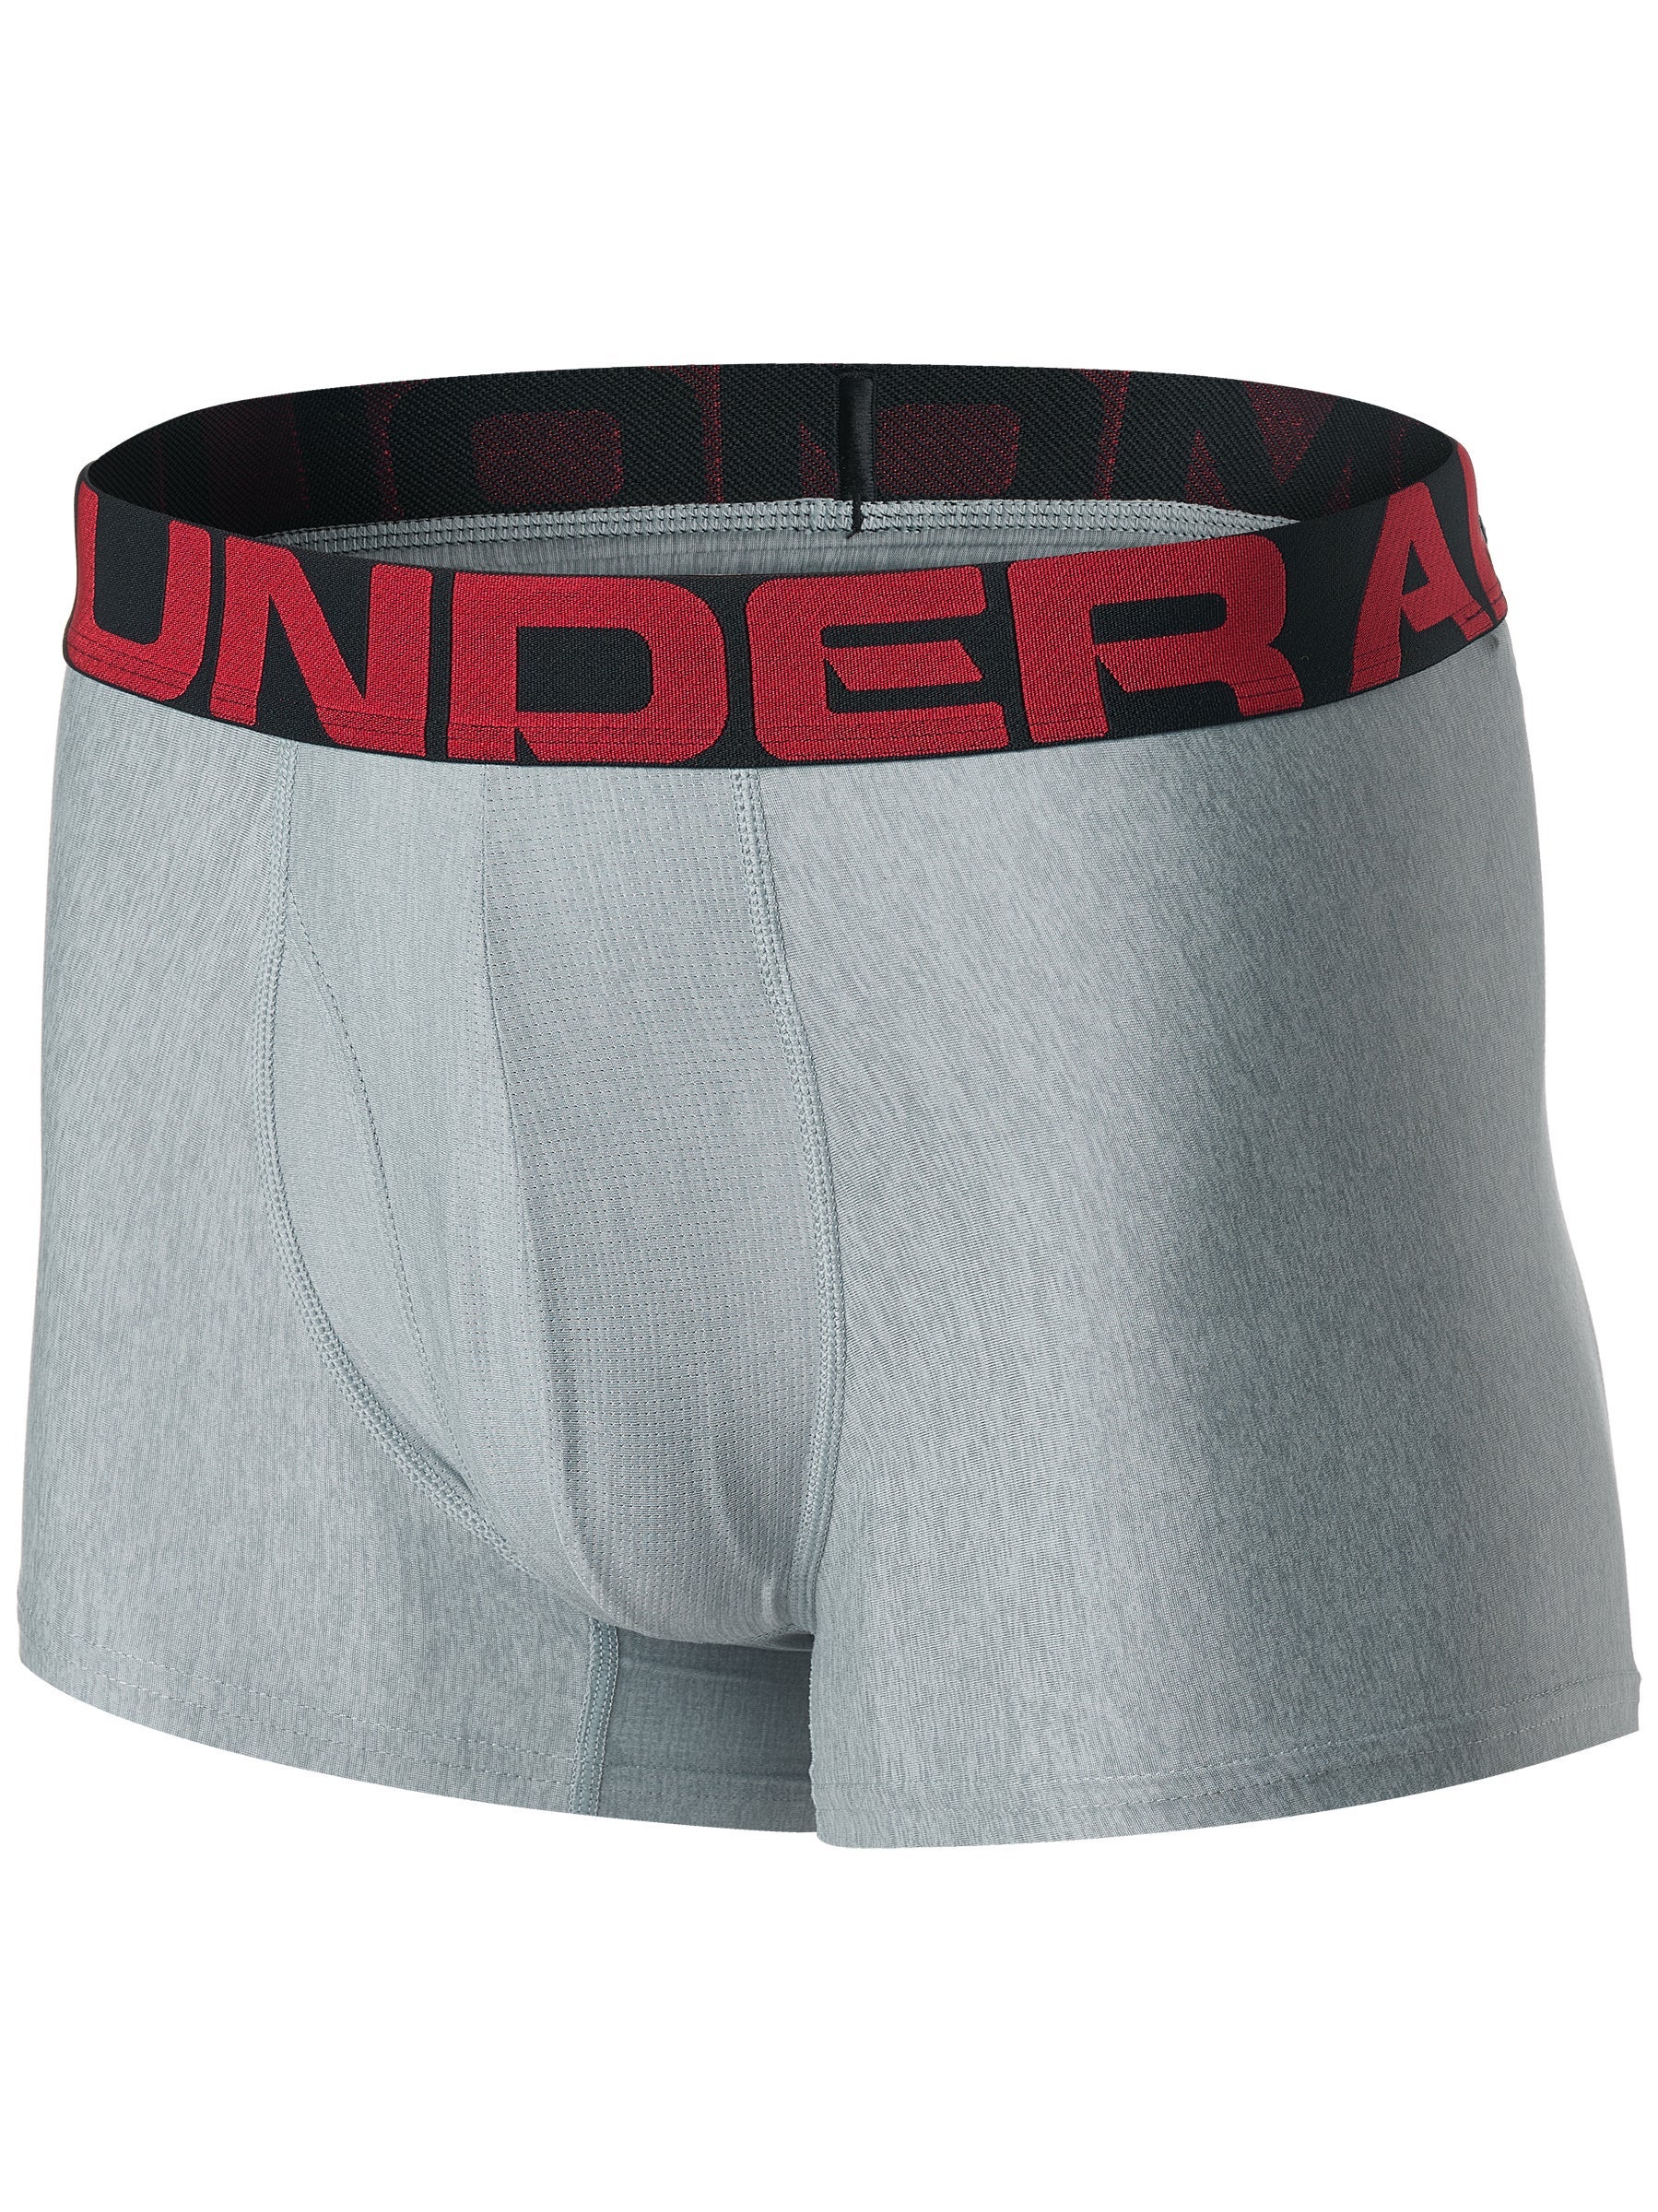 Under Armour Mens Tech 3 Inch Boxerjock Black Sports Running Gym Breathable 